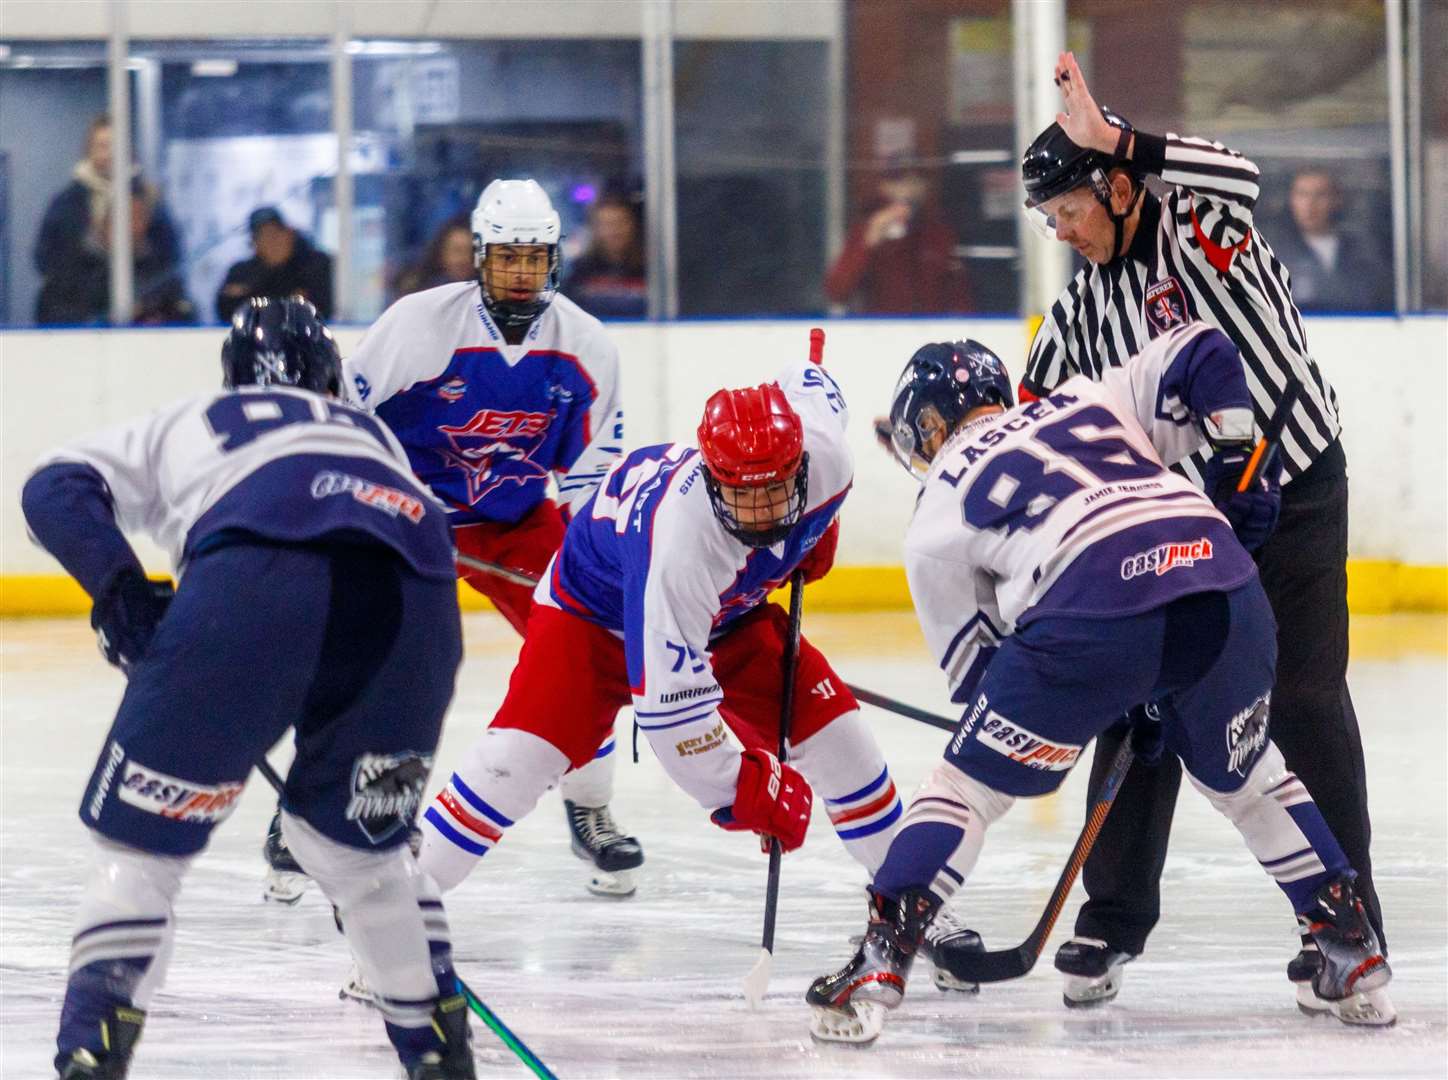 Invicta Dynamos took on Slough Jets with a reduced capacity at Planet Ice. Picture: David Trevallion